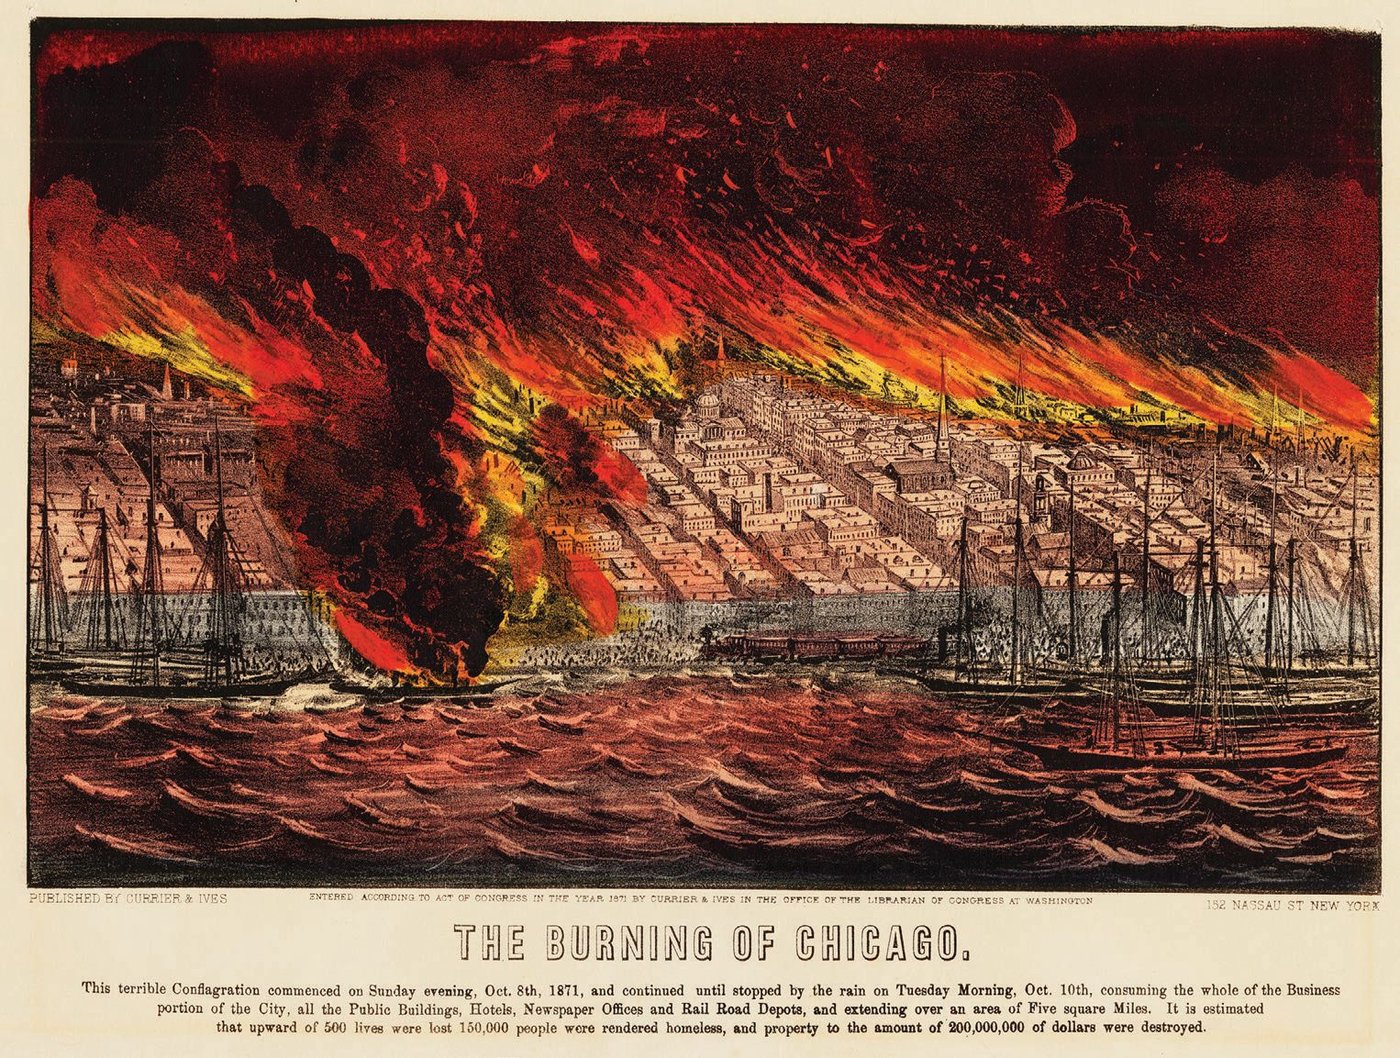 An 1871 Currier and Ives lithograph on view at the exhibition dramatically depicts the destructive path of the Great Chicago Fire. PHOTO COURTESY OF CHICAGO HISTORY MUSEUM